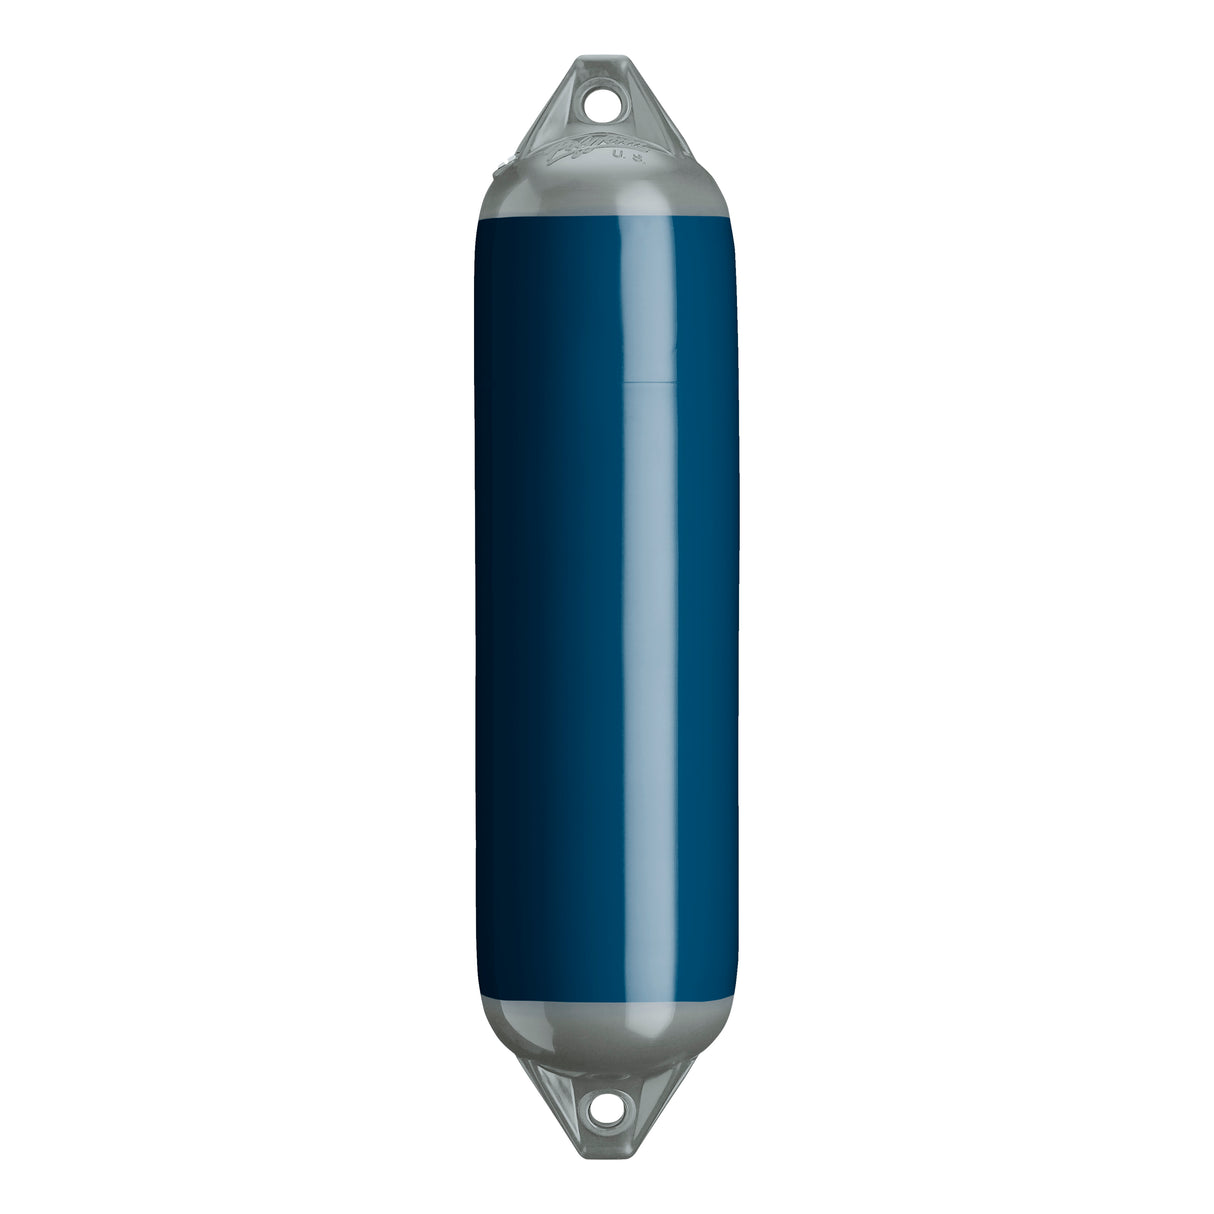 Catalina Blue boat fender with Grey-Top, Polyform F-1